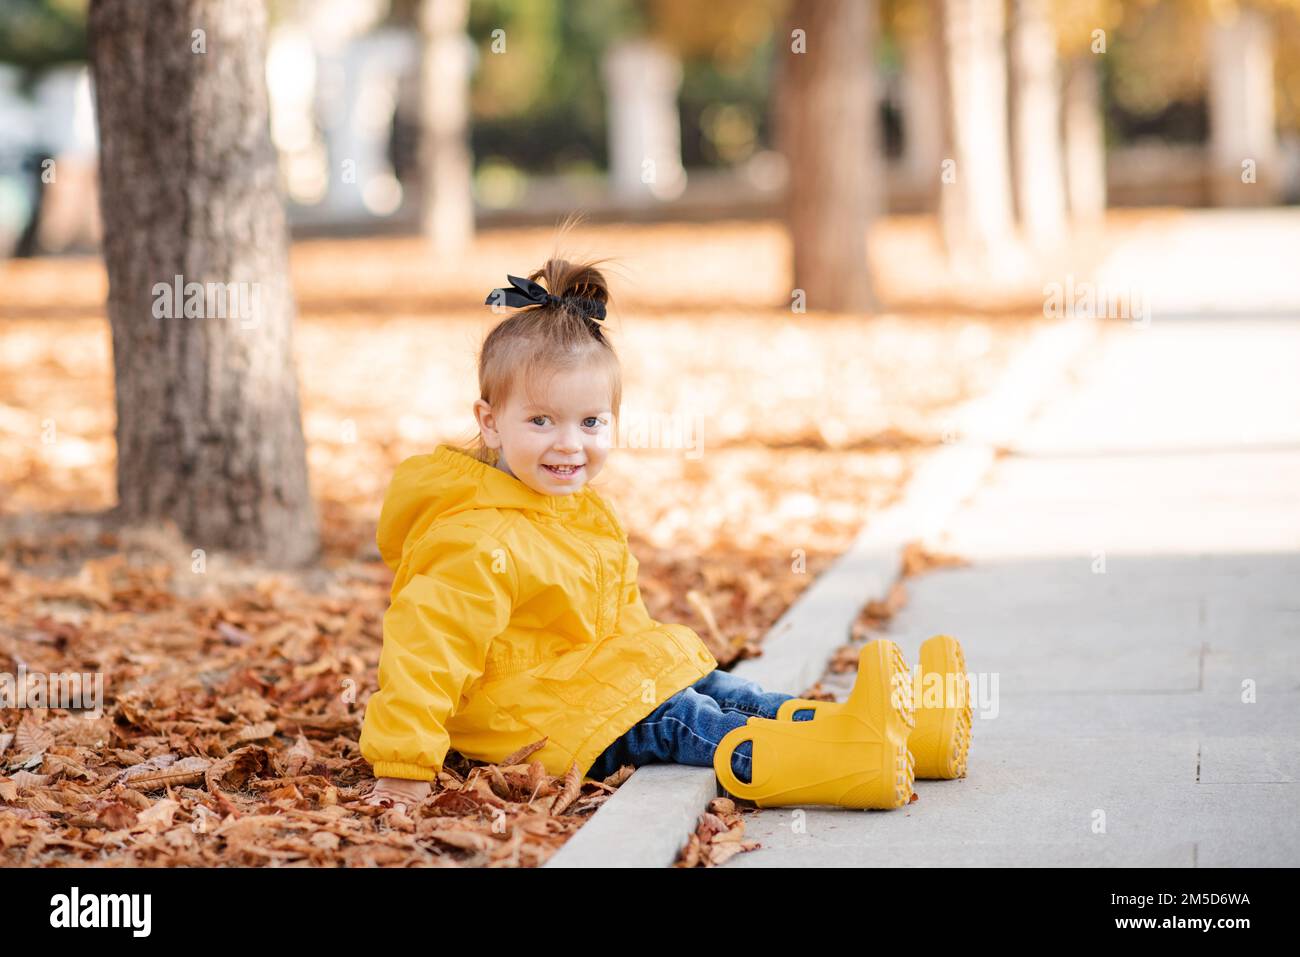 Cute funny kid girl 2-3 year old wear yellow rain jacket and rubber boots in autumn park outdoor over fallen leaves. Fall season. Childhood. Stock Photo